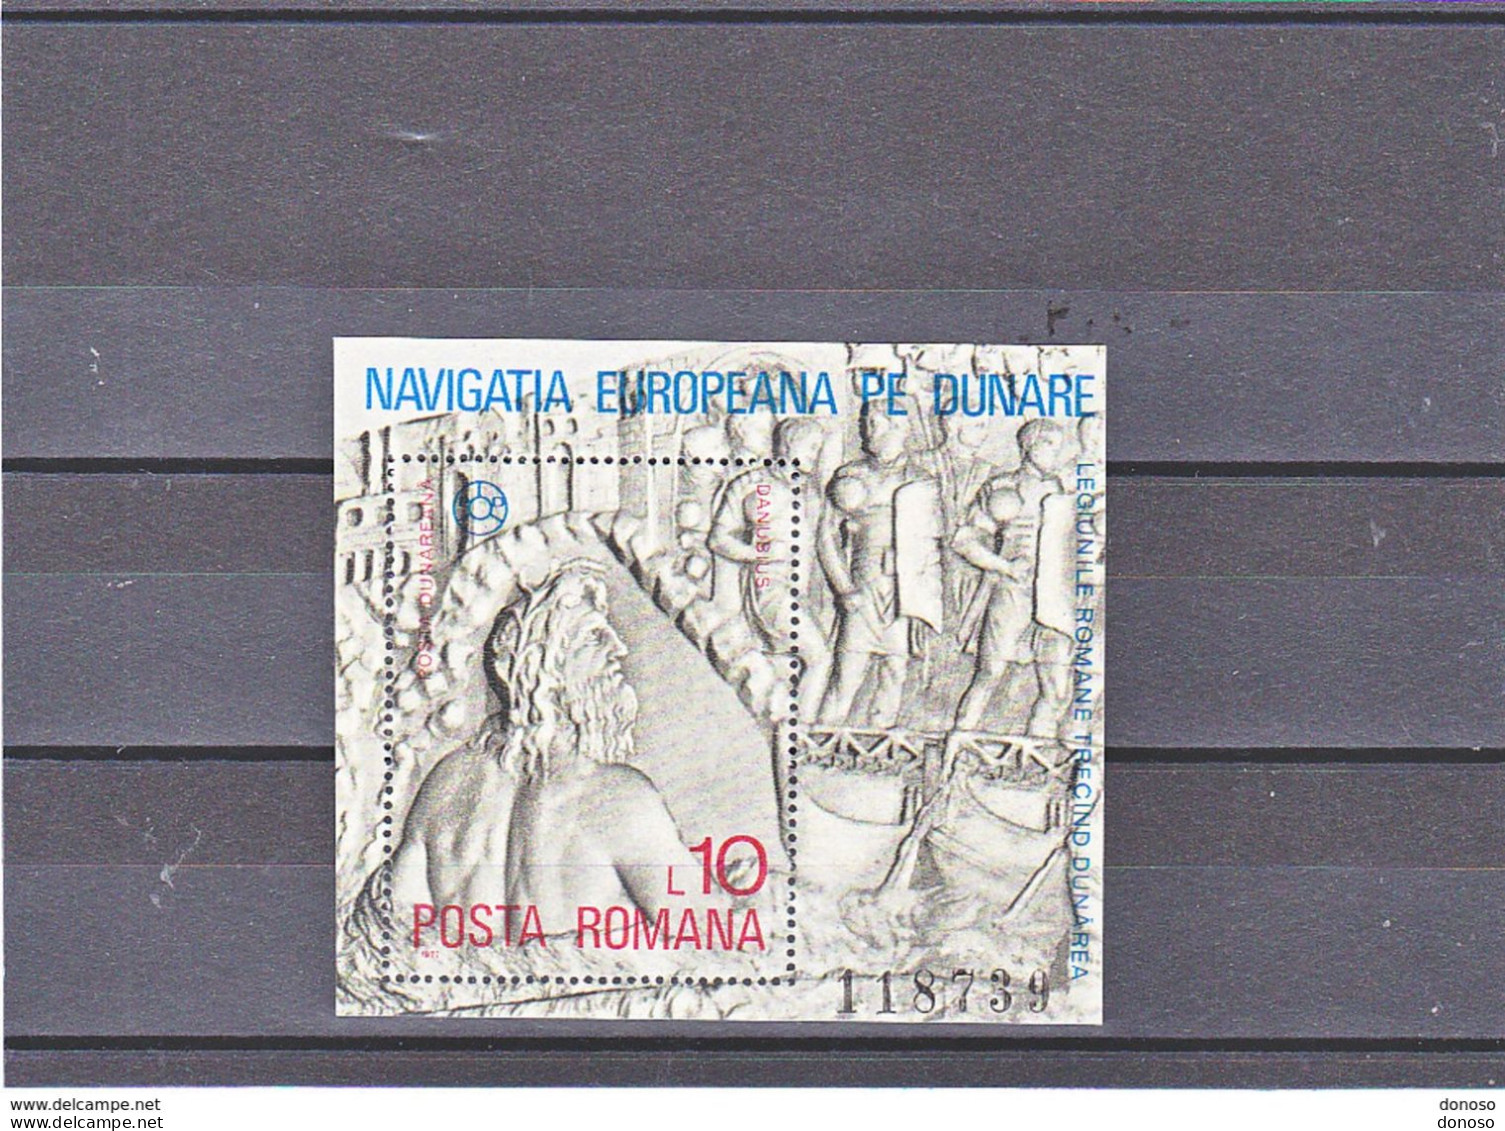 ROUMANIE 1977 LE DANUBE Yvert BF 130, Michel Bl 146 NEUF** MNH Cote 8 Euros - Unused Stamps